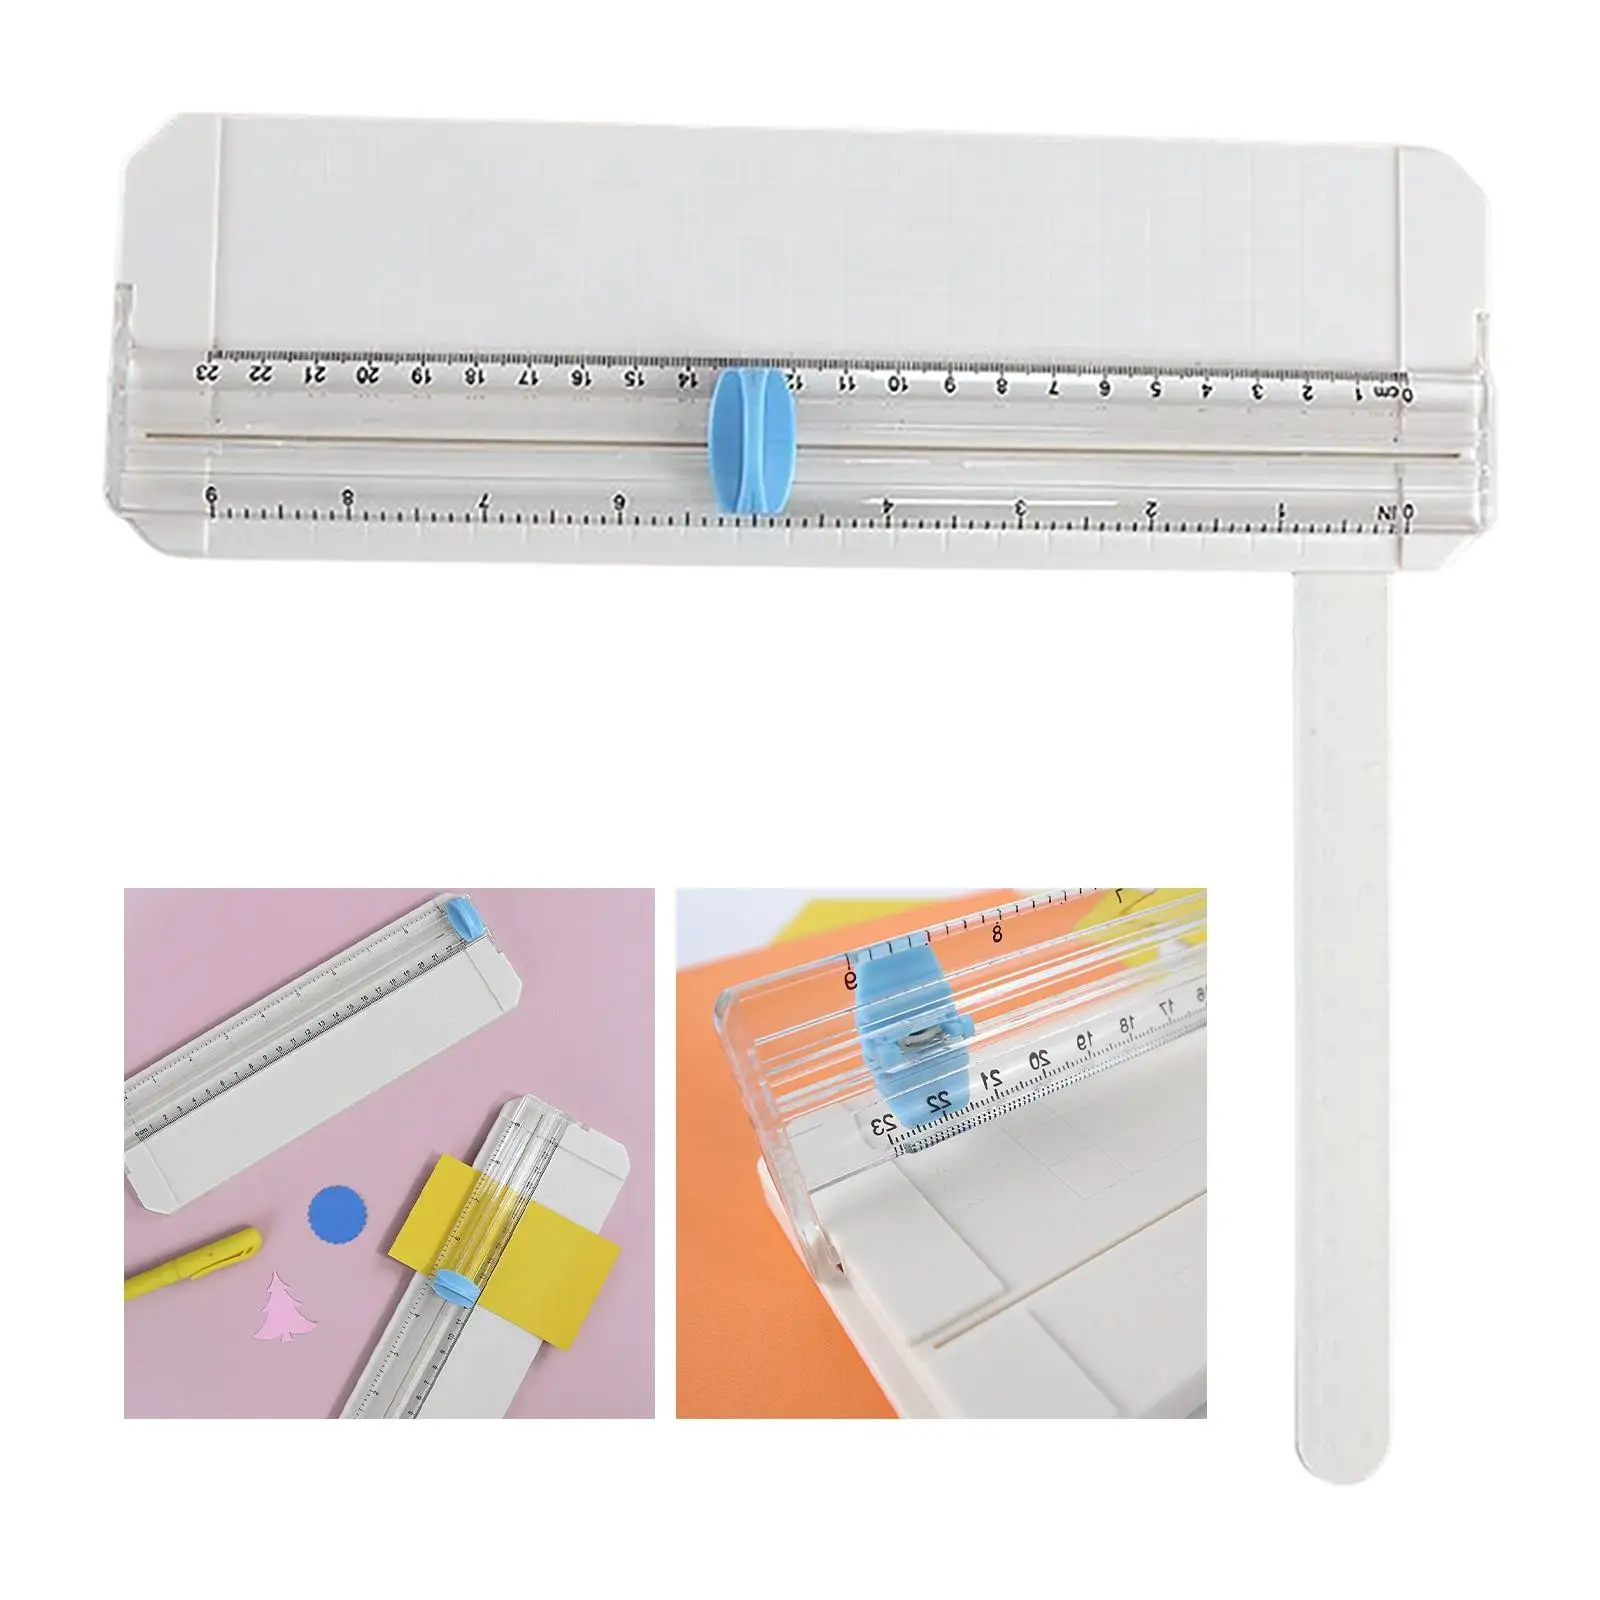 Adjustable Paper Cutter Craft Supplies Cutting Blade Cutting Tool 23cm Paper Trimmer for Craft Paper Scrapbooking Greeting Cards